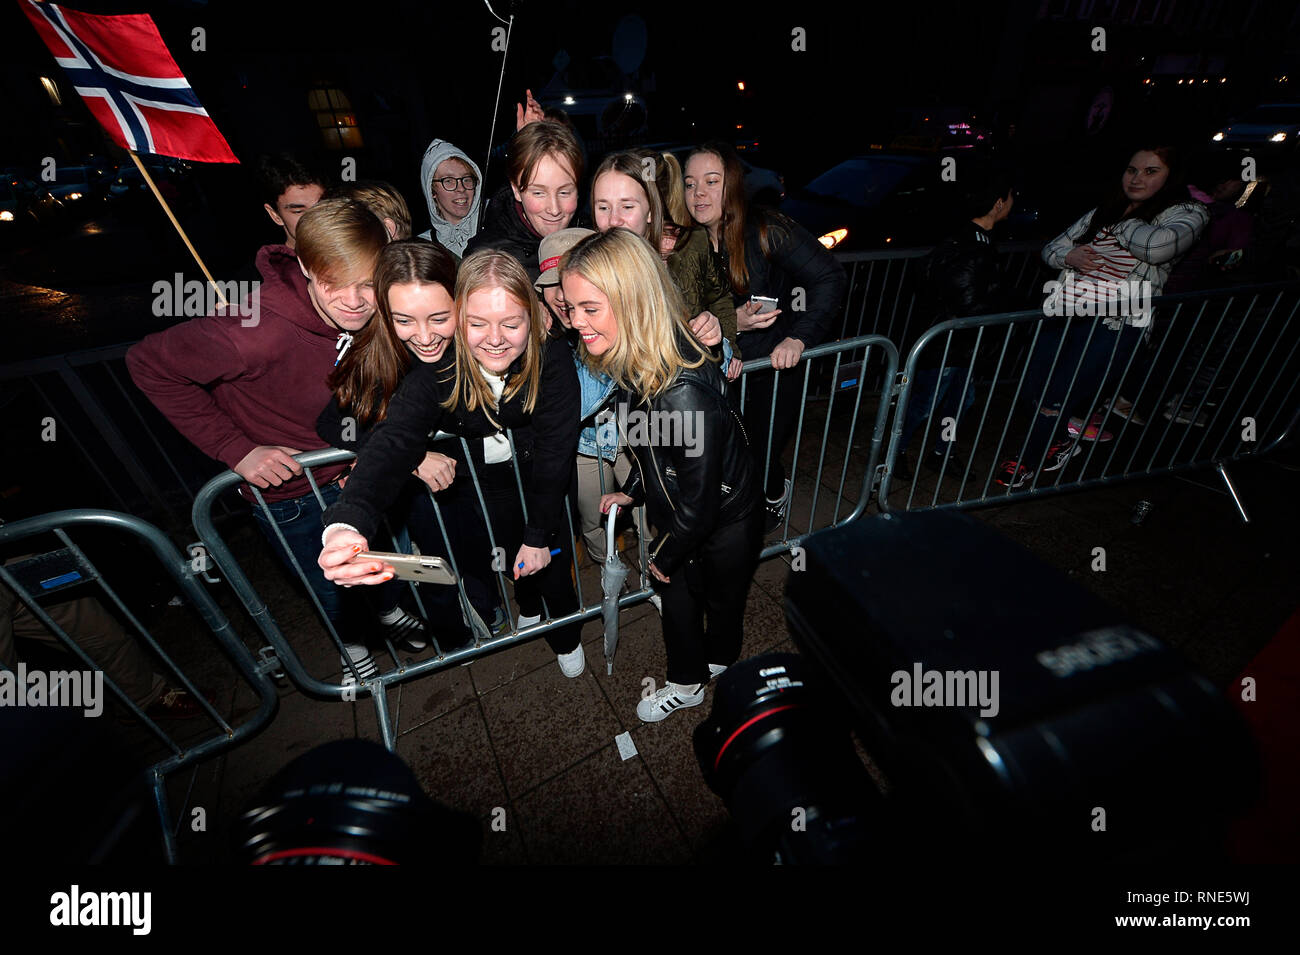 Londonderry, UK. 18th Feb, 2019. Derry Girls Series 2 Premiere, Londonderry, Northern Ireland: 18th February 2019. Actor Saoirse Jackson greets fans at the Omniplex Cinema, Londonderry for the premiere of Derry Girls Series 2.  ©George Sweeney / Alamy Live News Credit: George Sweeney/Alamy Live News Stock Photo